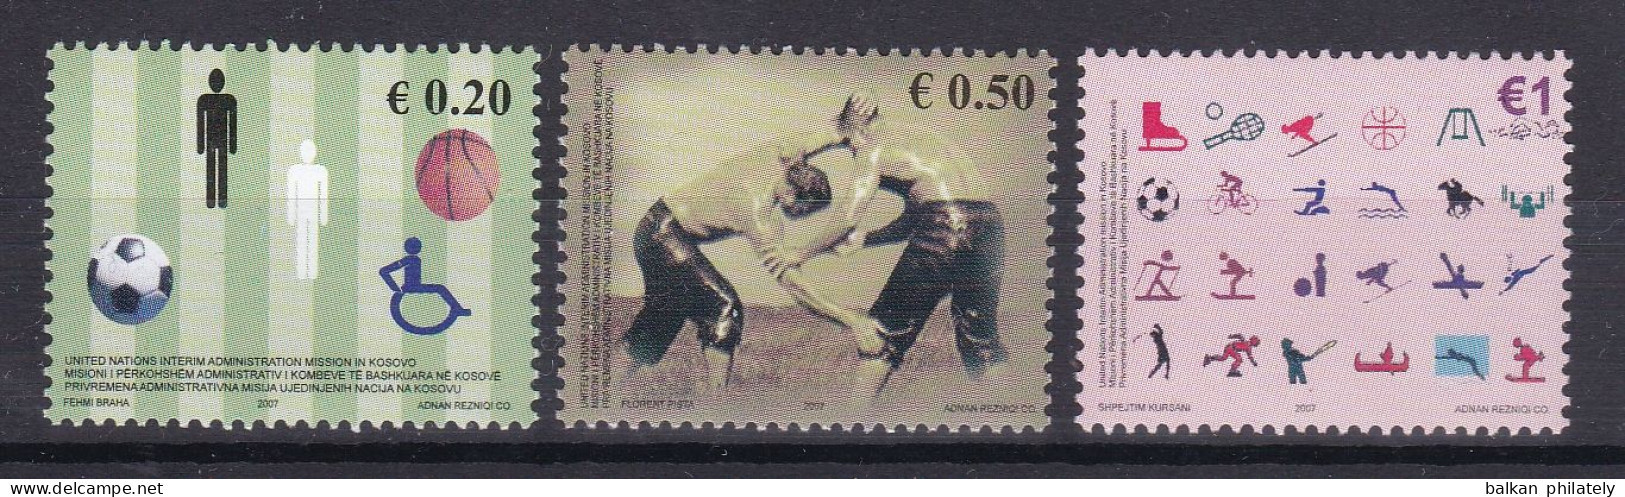 Kosovo 2007 Sports Basketball Football Disabled Persons Wrestling Tennis Cycling Equestrian UNMIK UN United Nations MNH - Unused Stamps